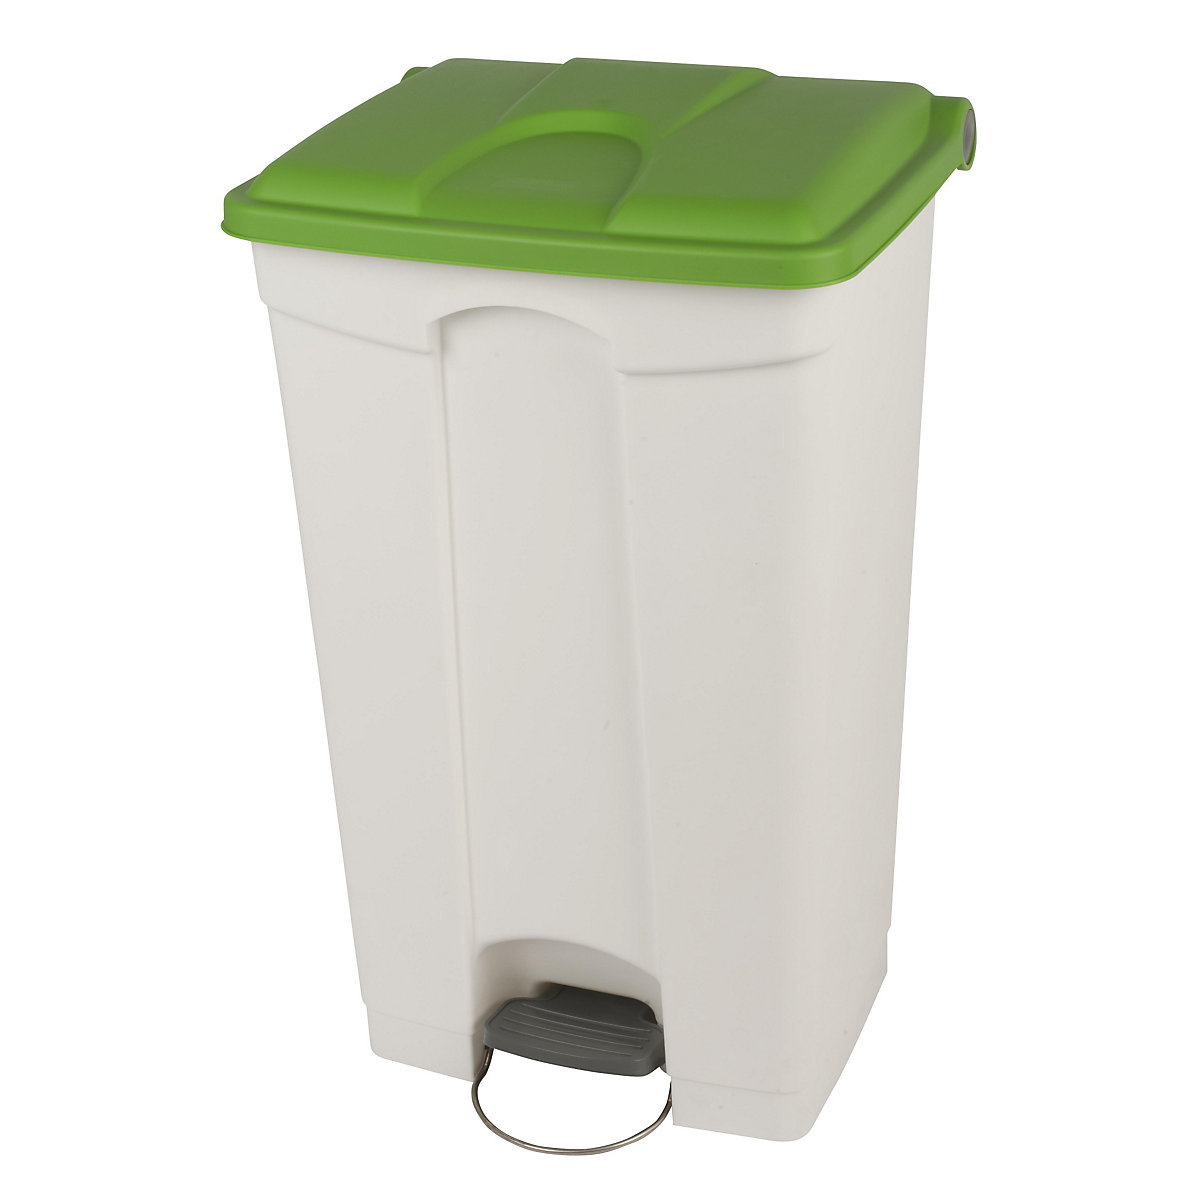 EUROKRAFTbasic – Pedal waste collector, capacity 90 l, WxHxD 505 x 790 x 410 mm, white, green lid